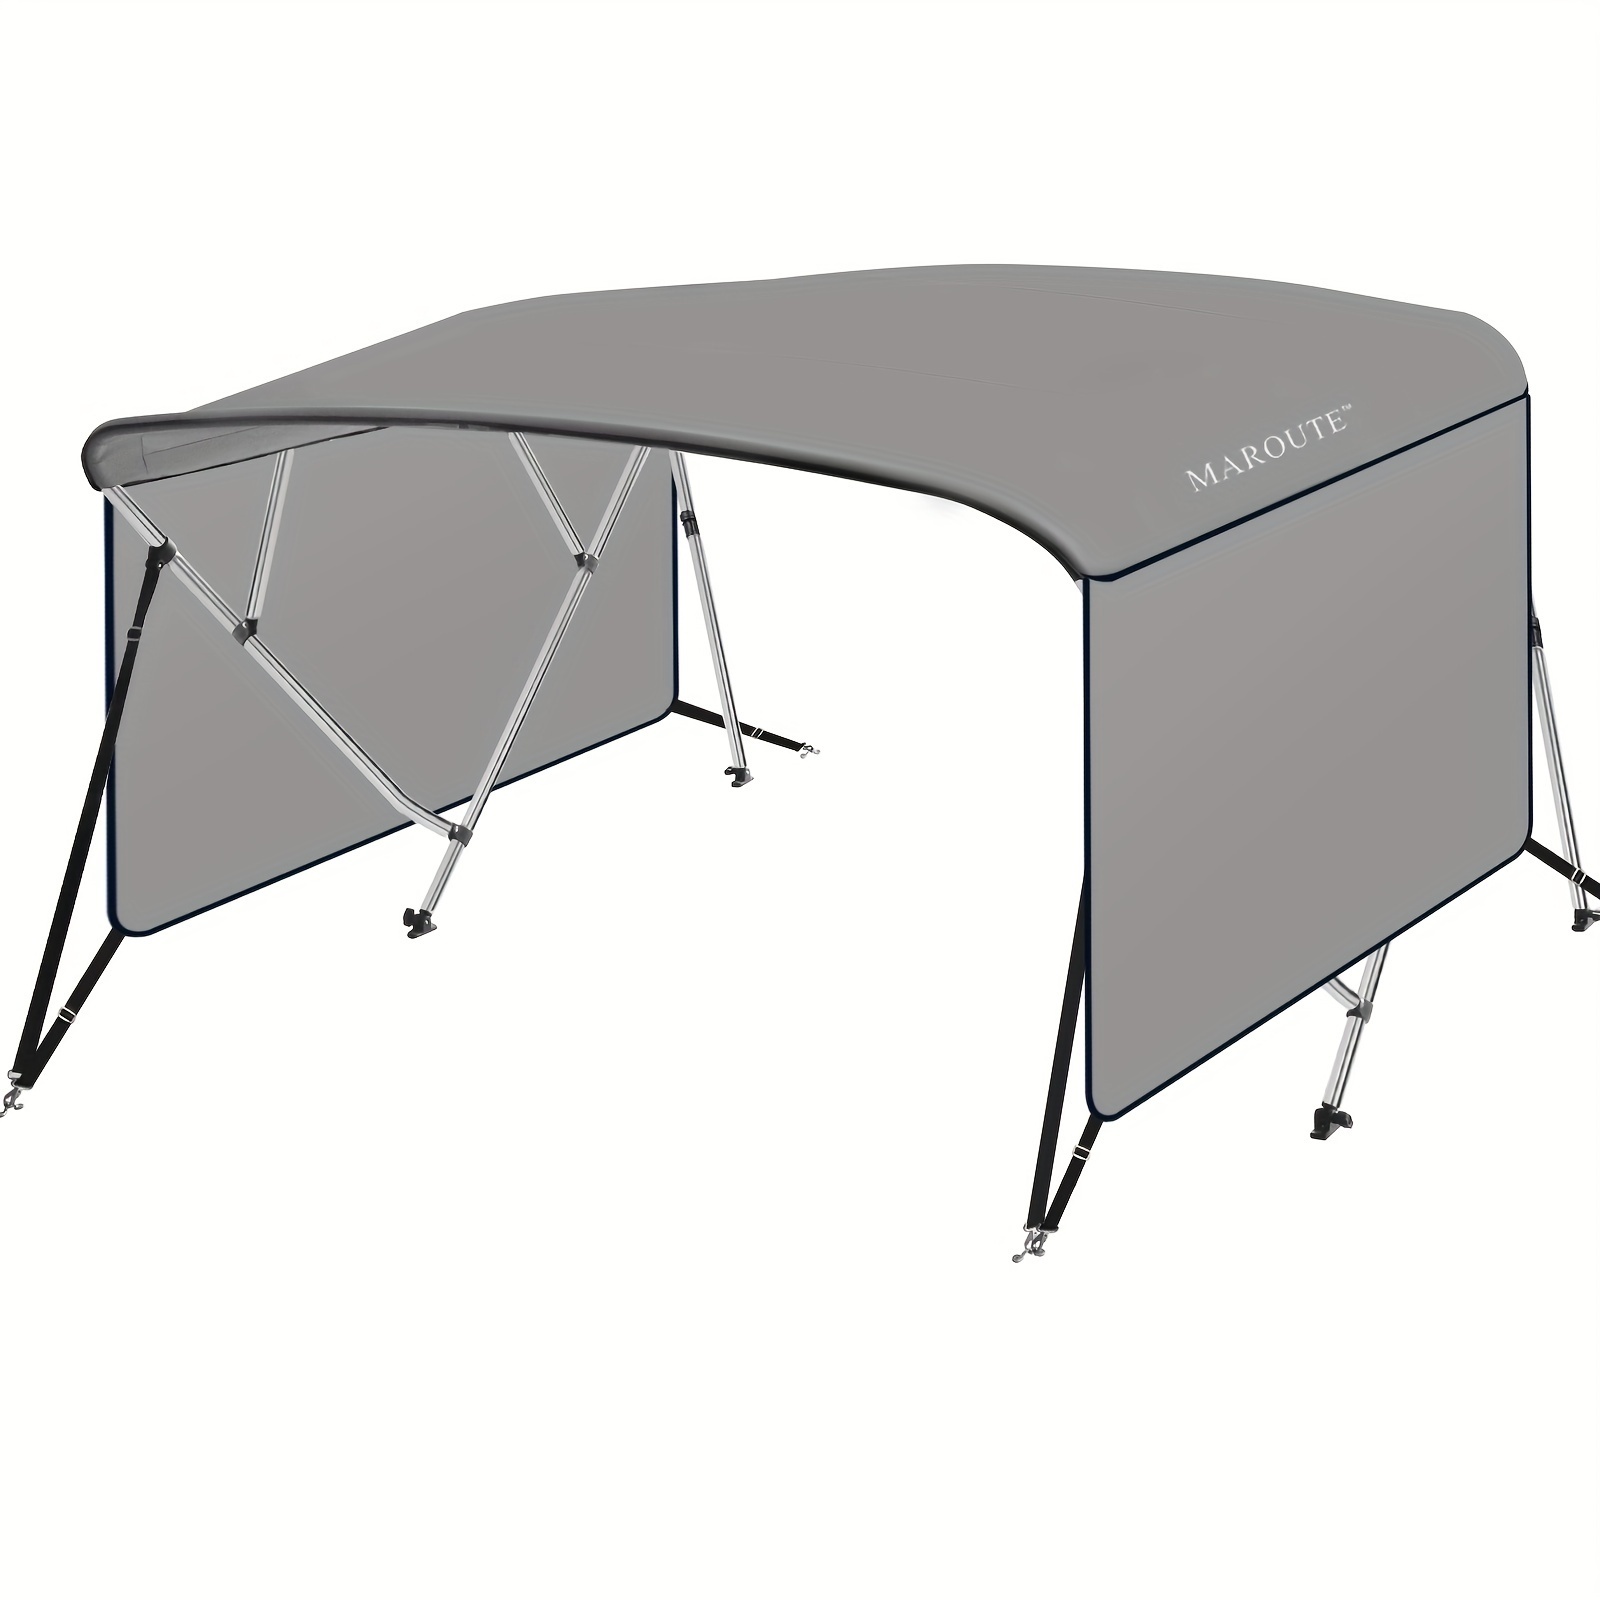 

4 Bow Bimini Top Boat Cover With 1"aluminum Alloy Frame, Include 2 Straps, 2 Adjustable Rear Support Pole, Zippered Storage Boot, Pu Coating Canvas